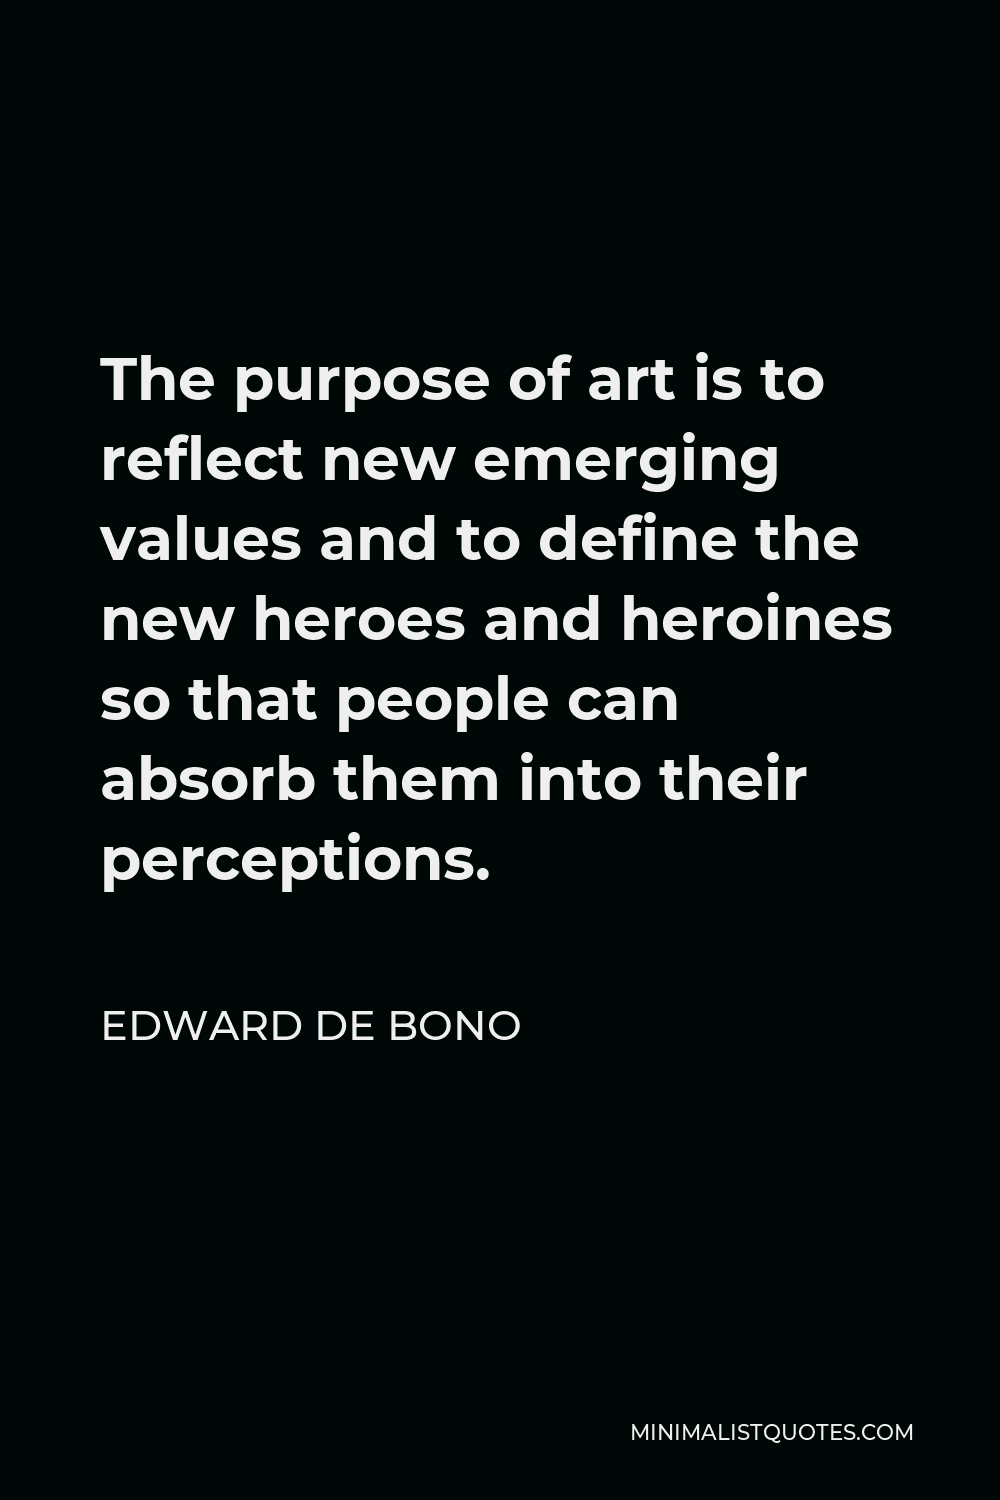 Edward de Bono Quote - The purpose of art is to reflect new emerging values and to define the new heroes and heroines so that people can absorb them into their perceptions.